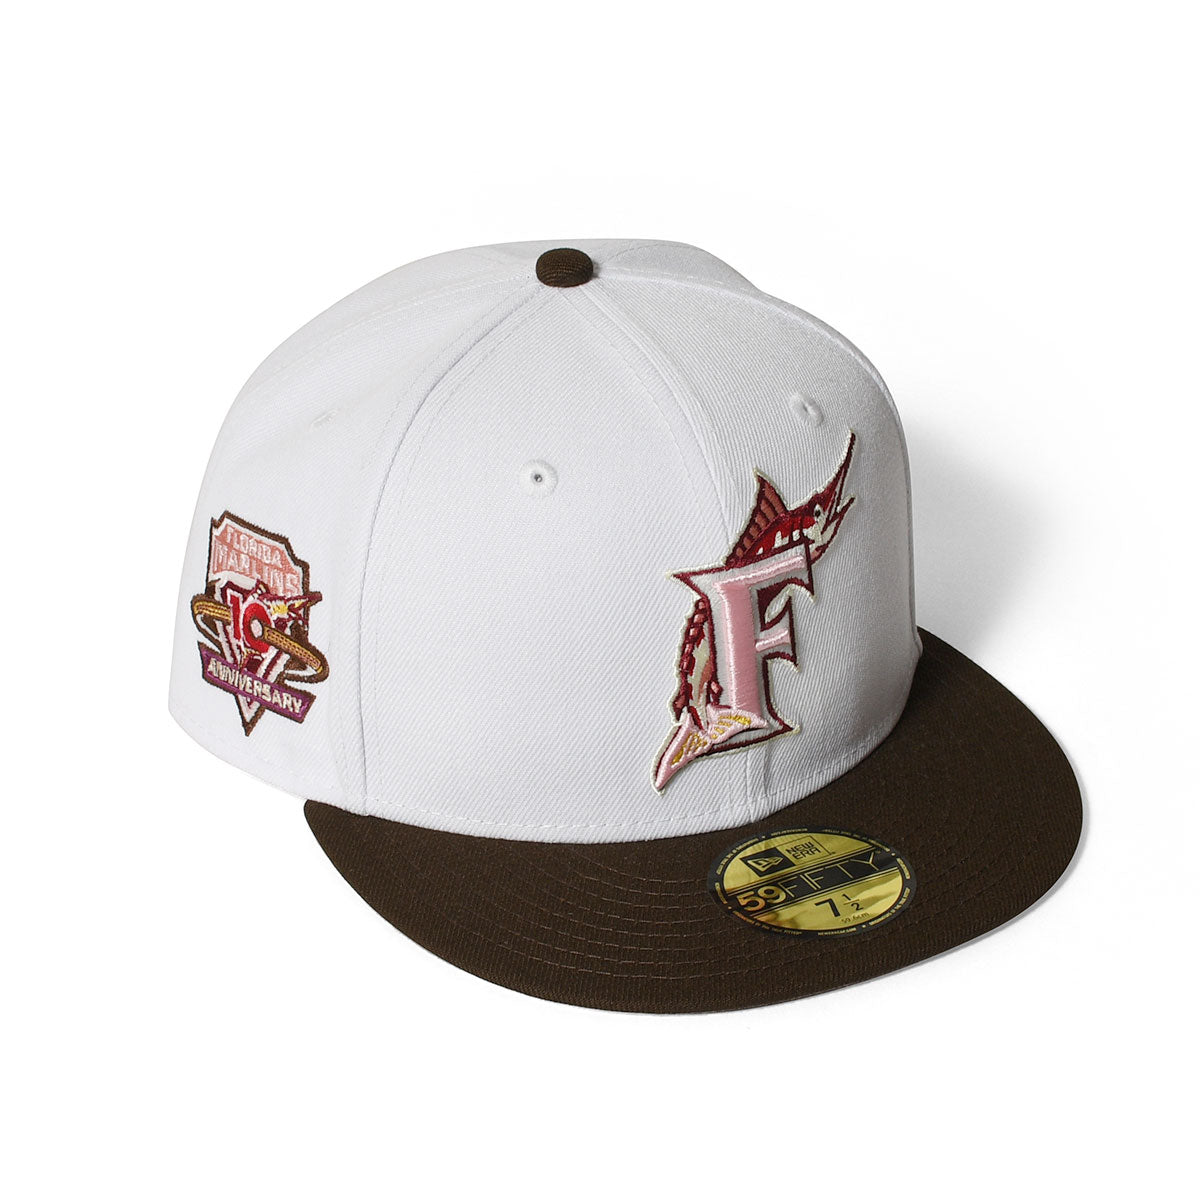 NEW ERA Florida Marlines - 10th ANV 59FIFTY WHITE/BROWN【13748377】